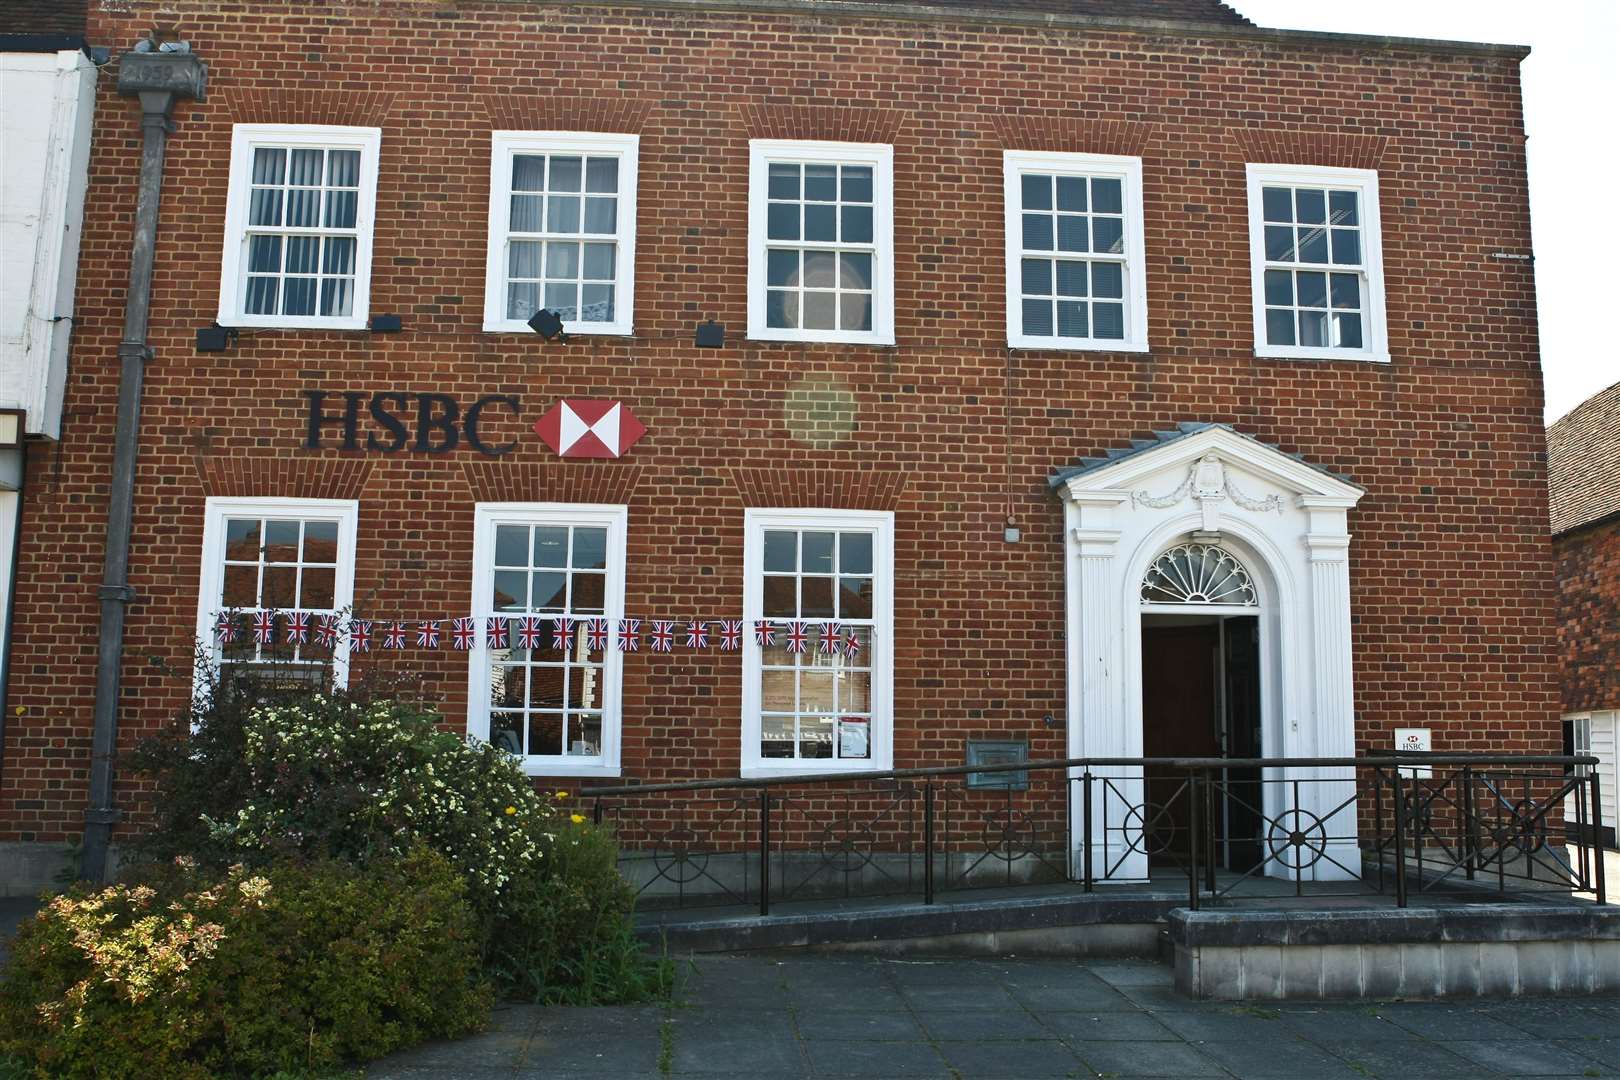 The former HSBC building in Tenterden is set to become a Specsavers